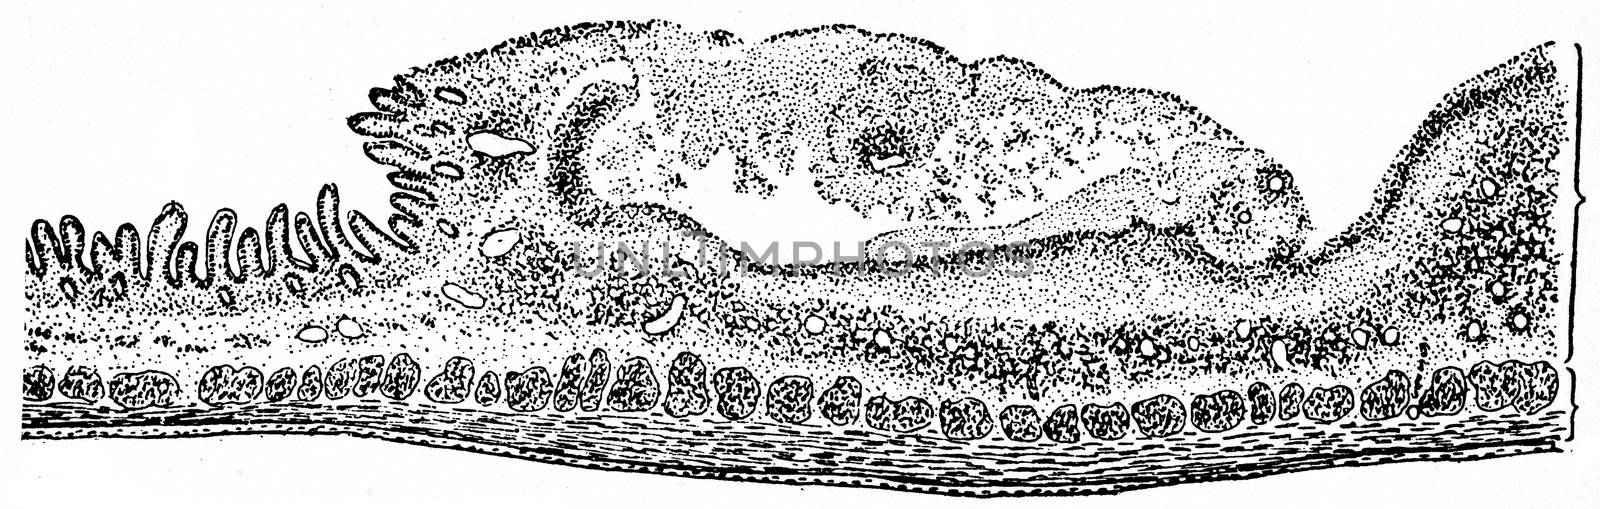 Section through a typhoid ulcer, end of second week of the disease, vintage engraved illustration.
